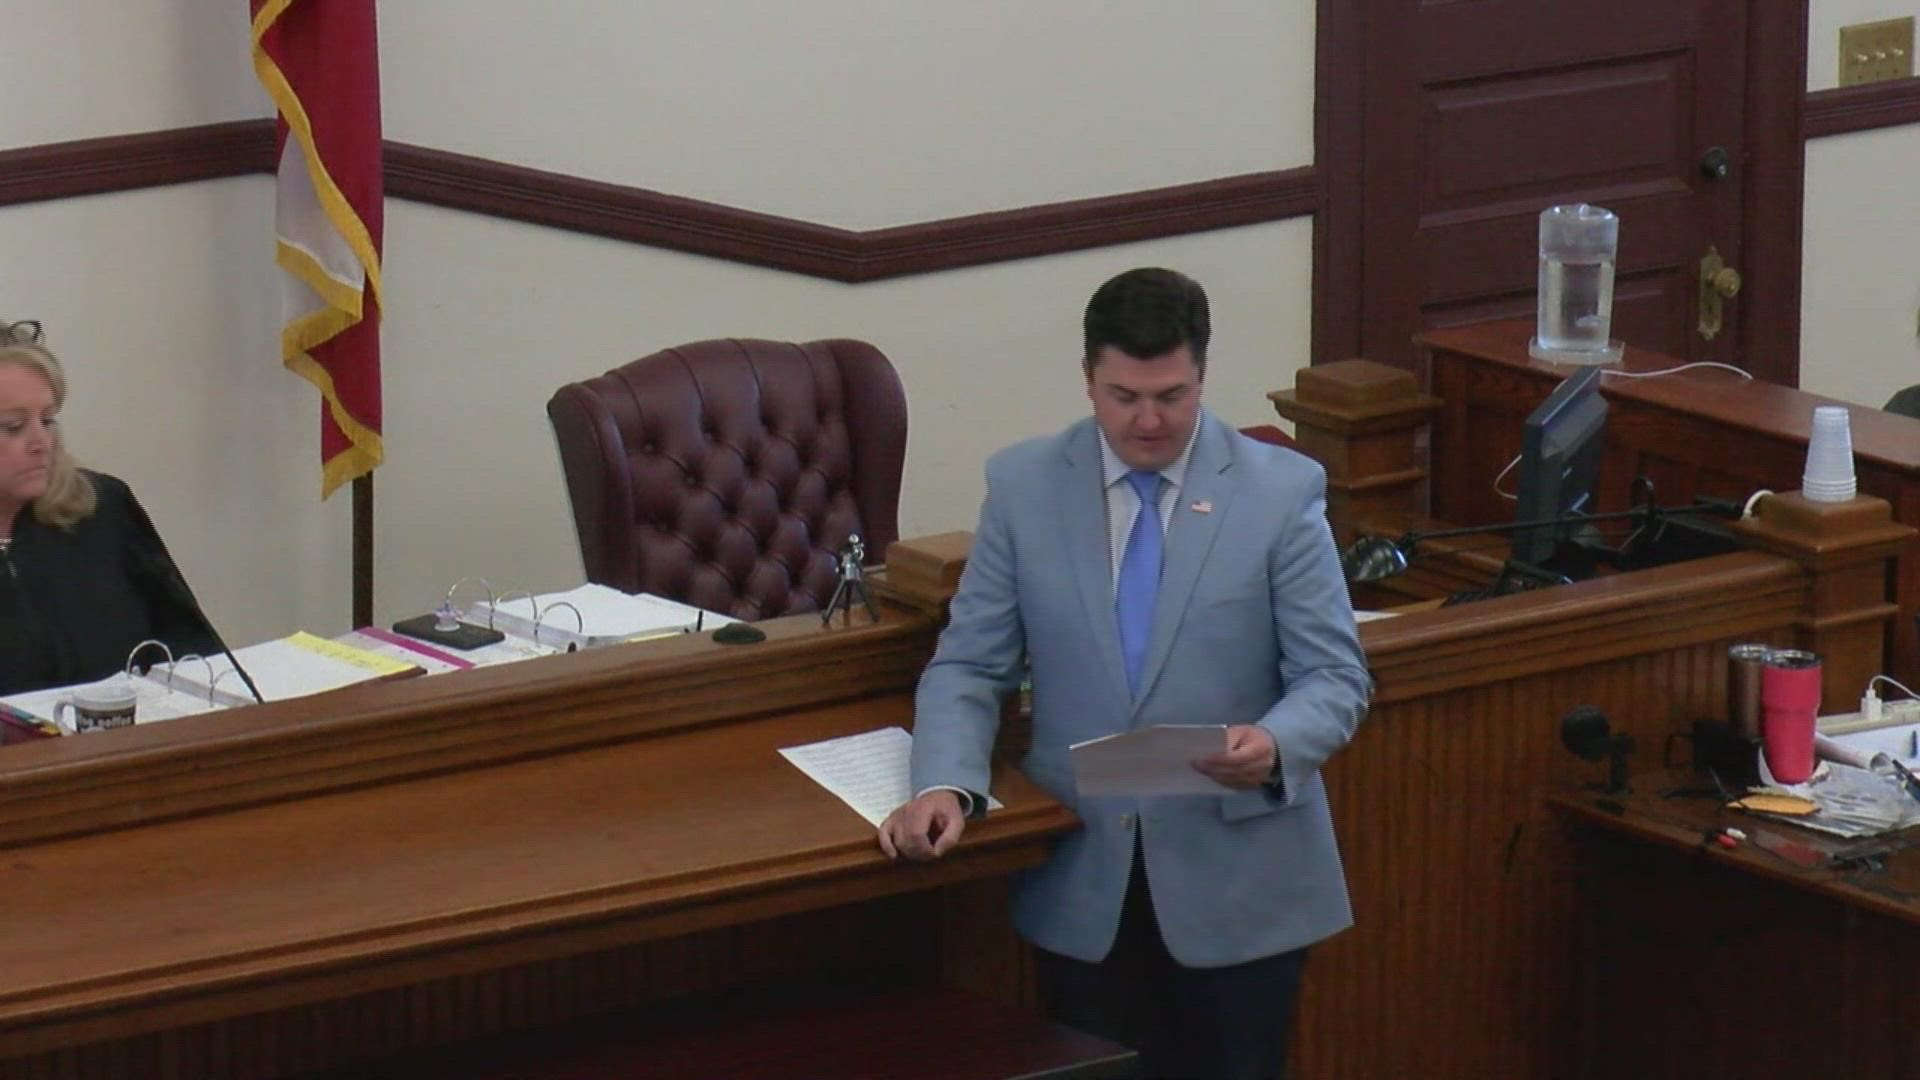 The trial will now move on to the sentencing phase where Rowe could receive the death penalty.